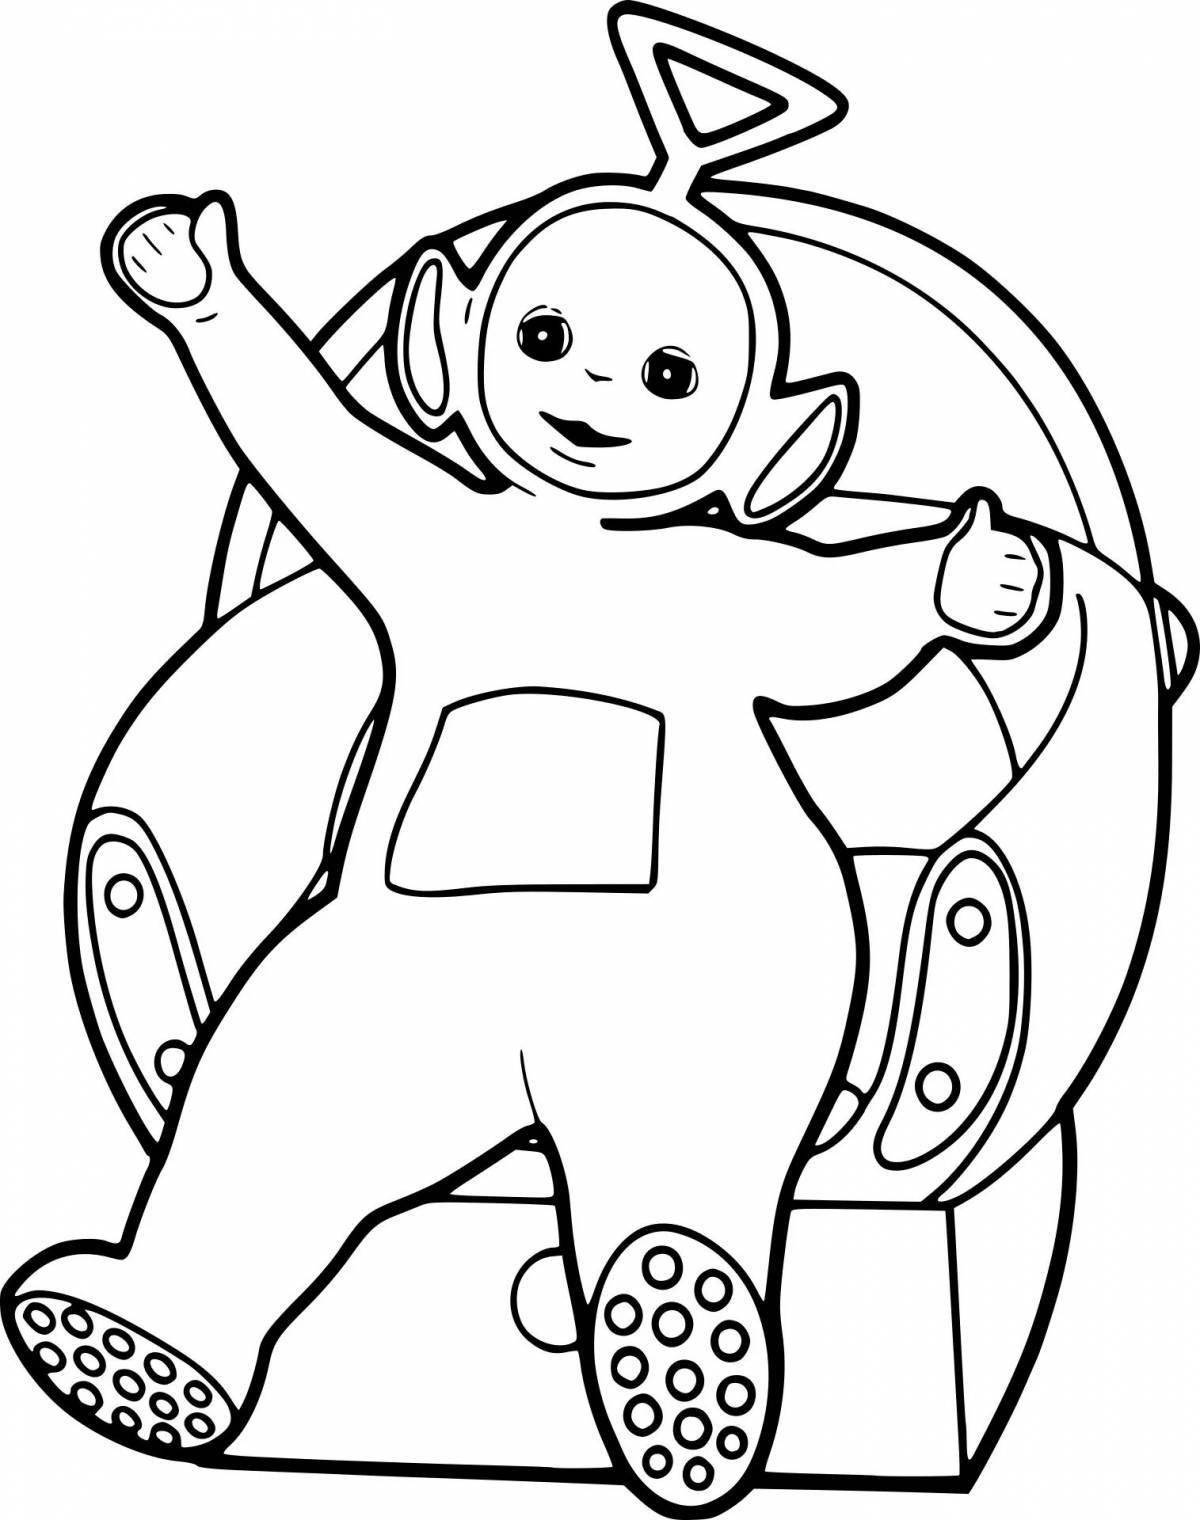 Coloring page charming slender tummies